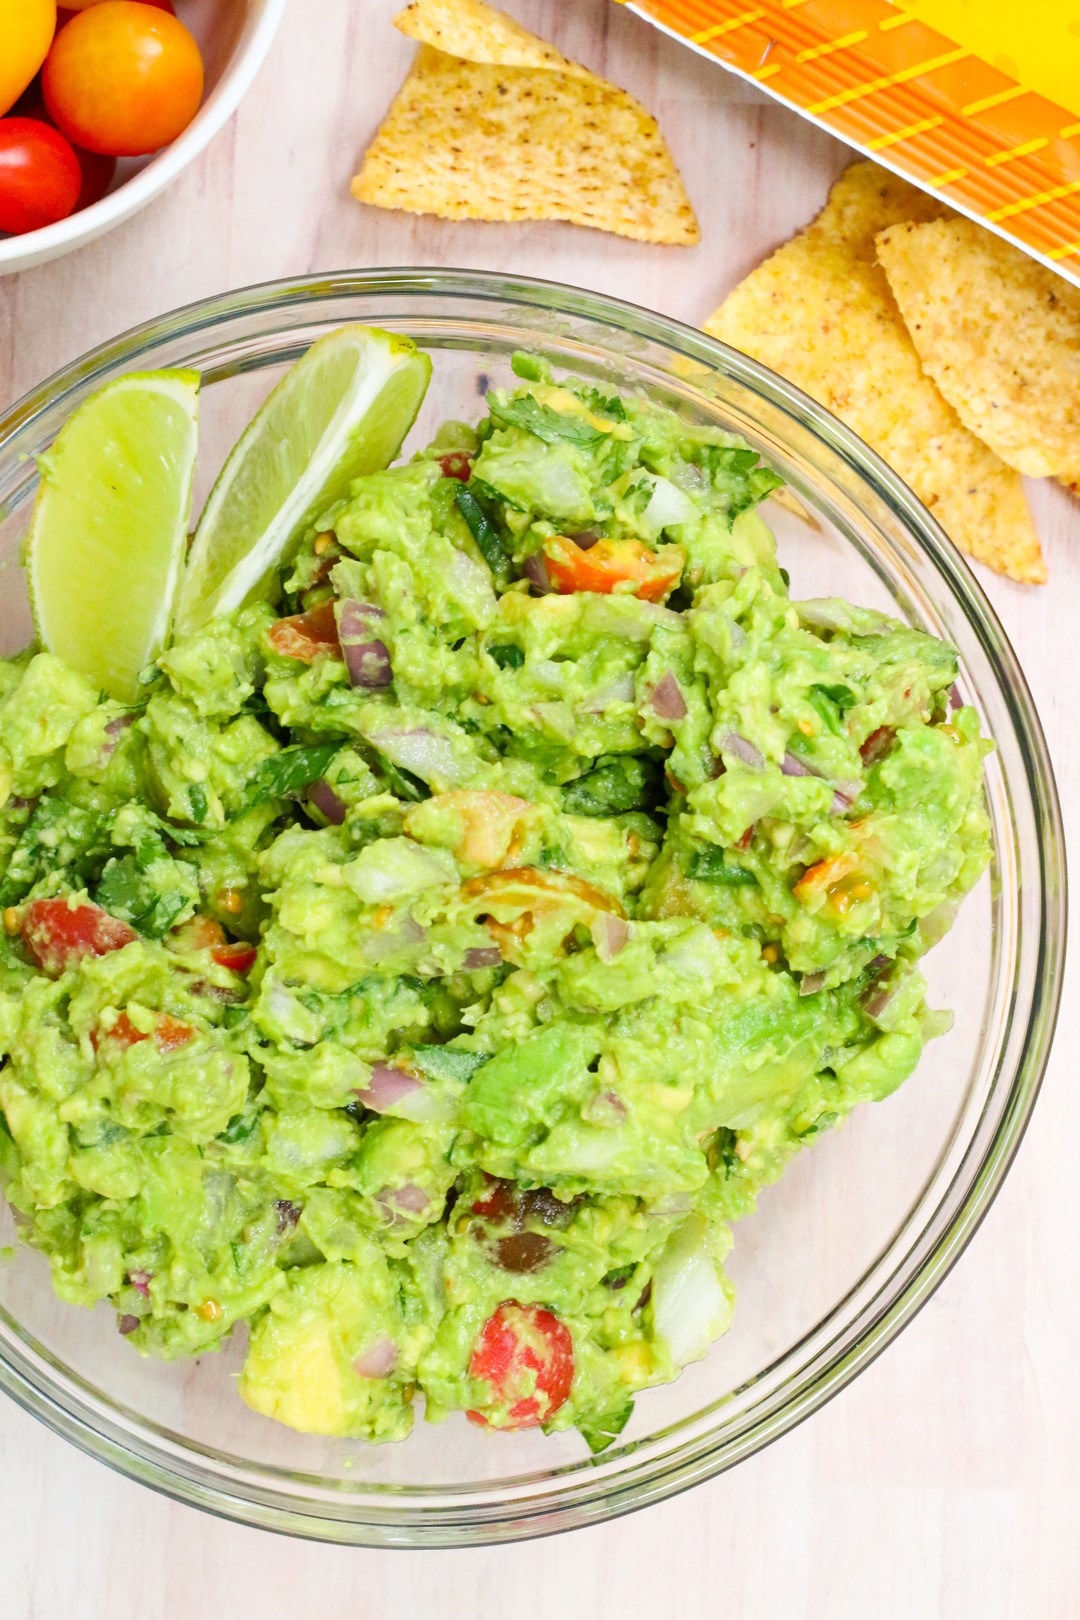 Classic Guacamole for Gameday